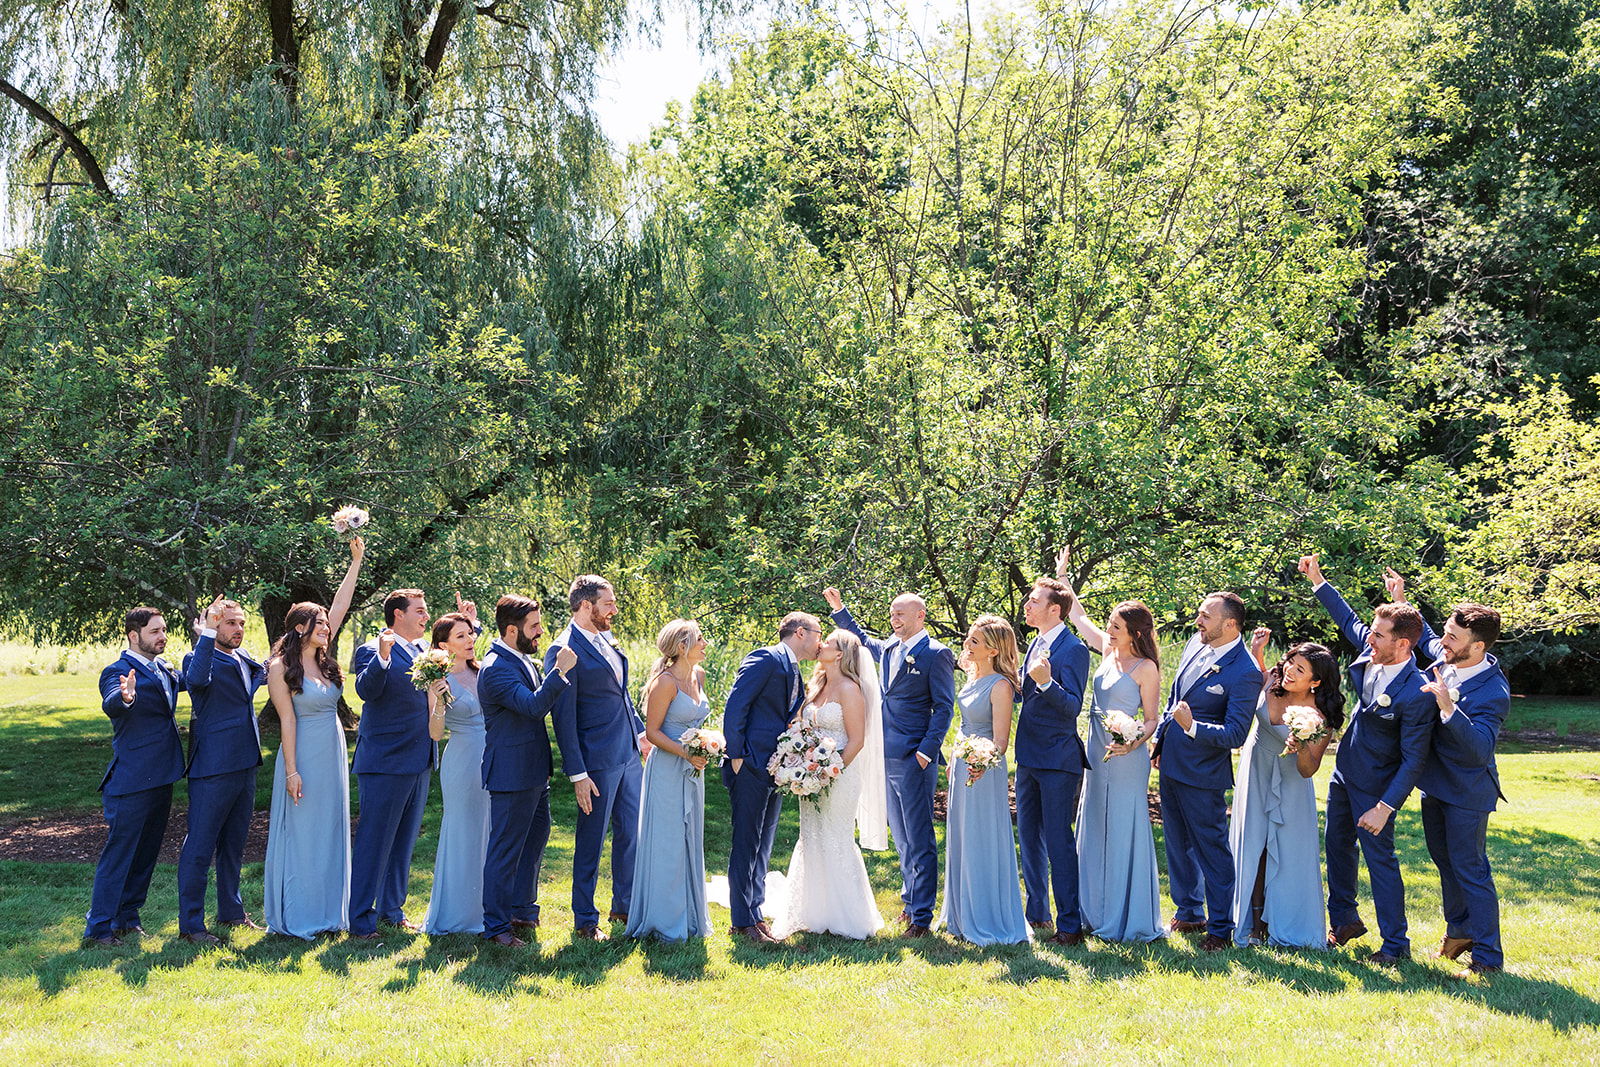 Newlyweds kiss in a lawn while surrounded by their cheering wedding party at their The Reserve At Perona Farms wedding